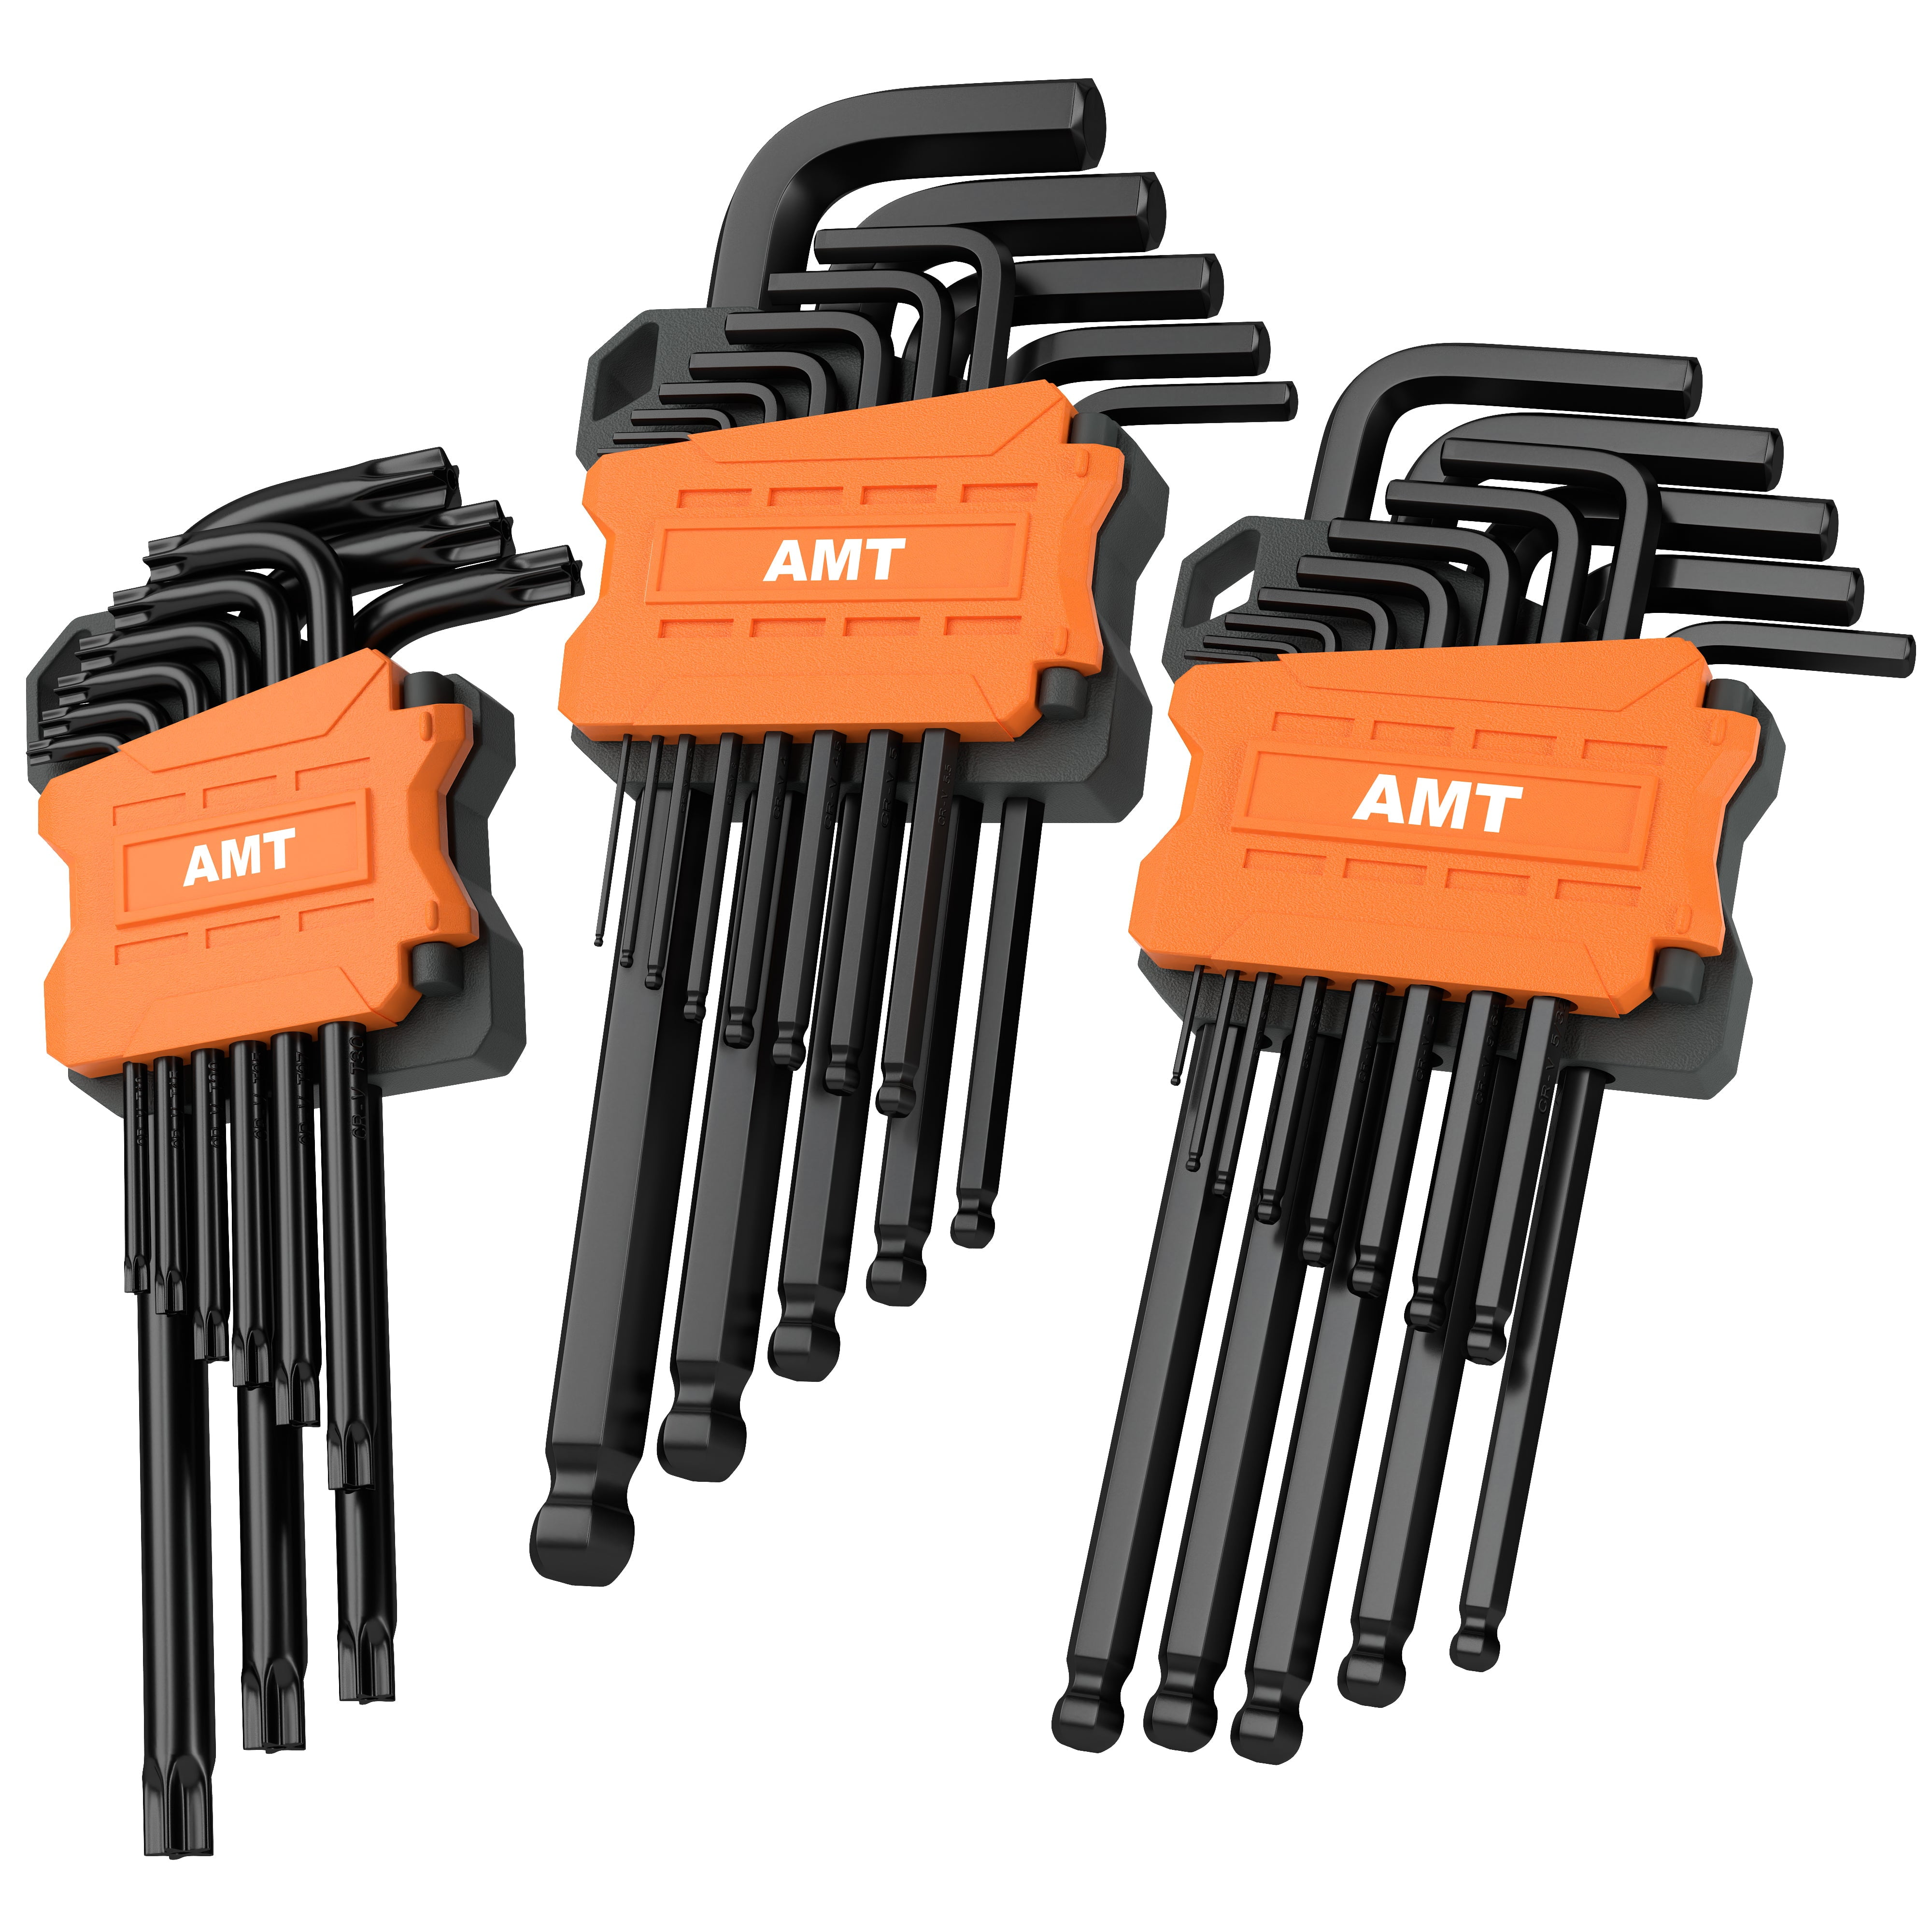 GO KART 5MM T BAR HEX KEY TEE HANDLE ZINC PLATED STRONG NEW FREE DELIVERY 